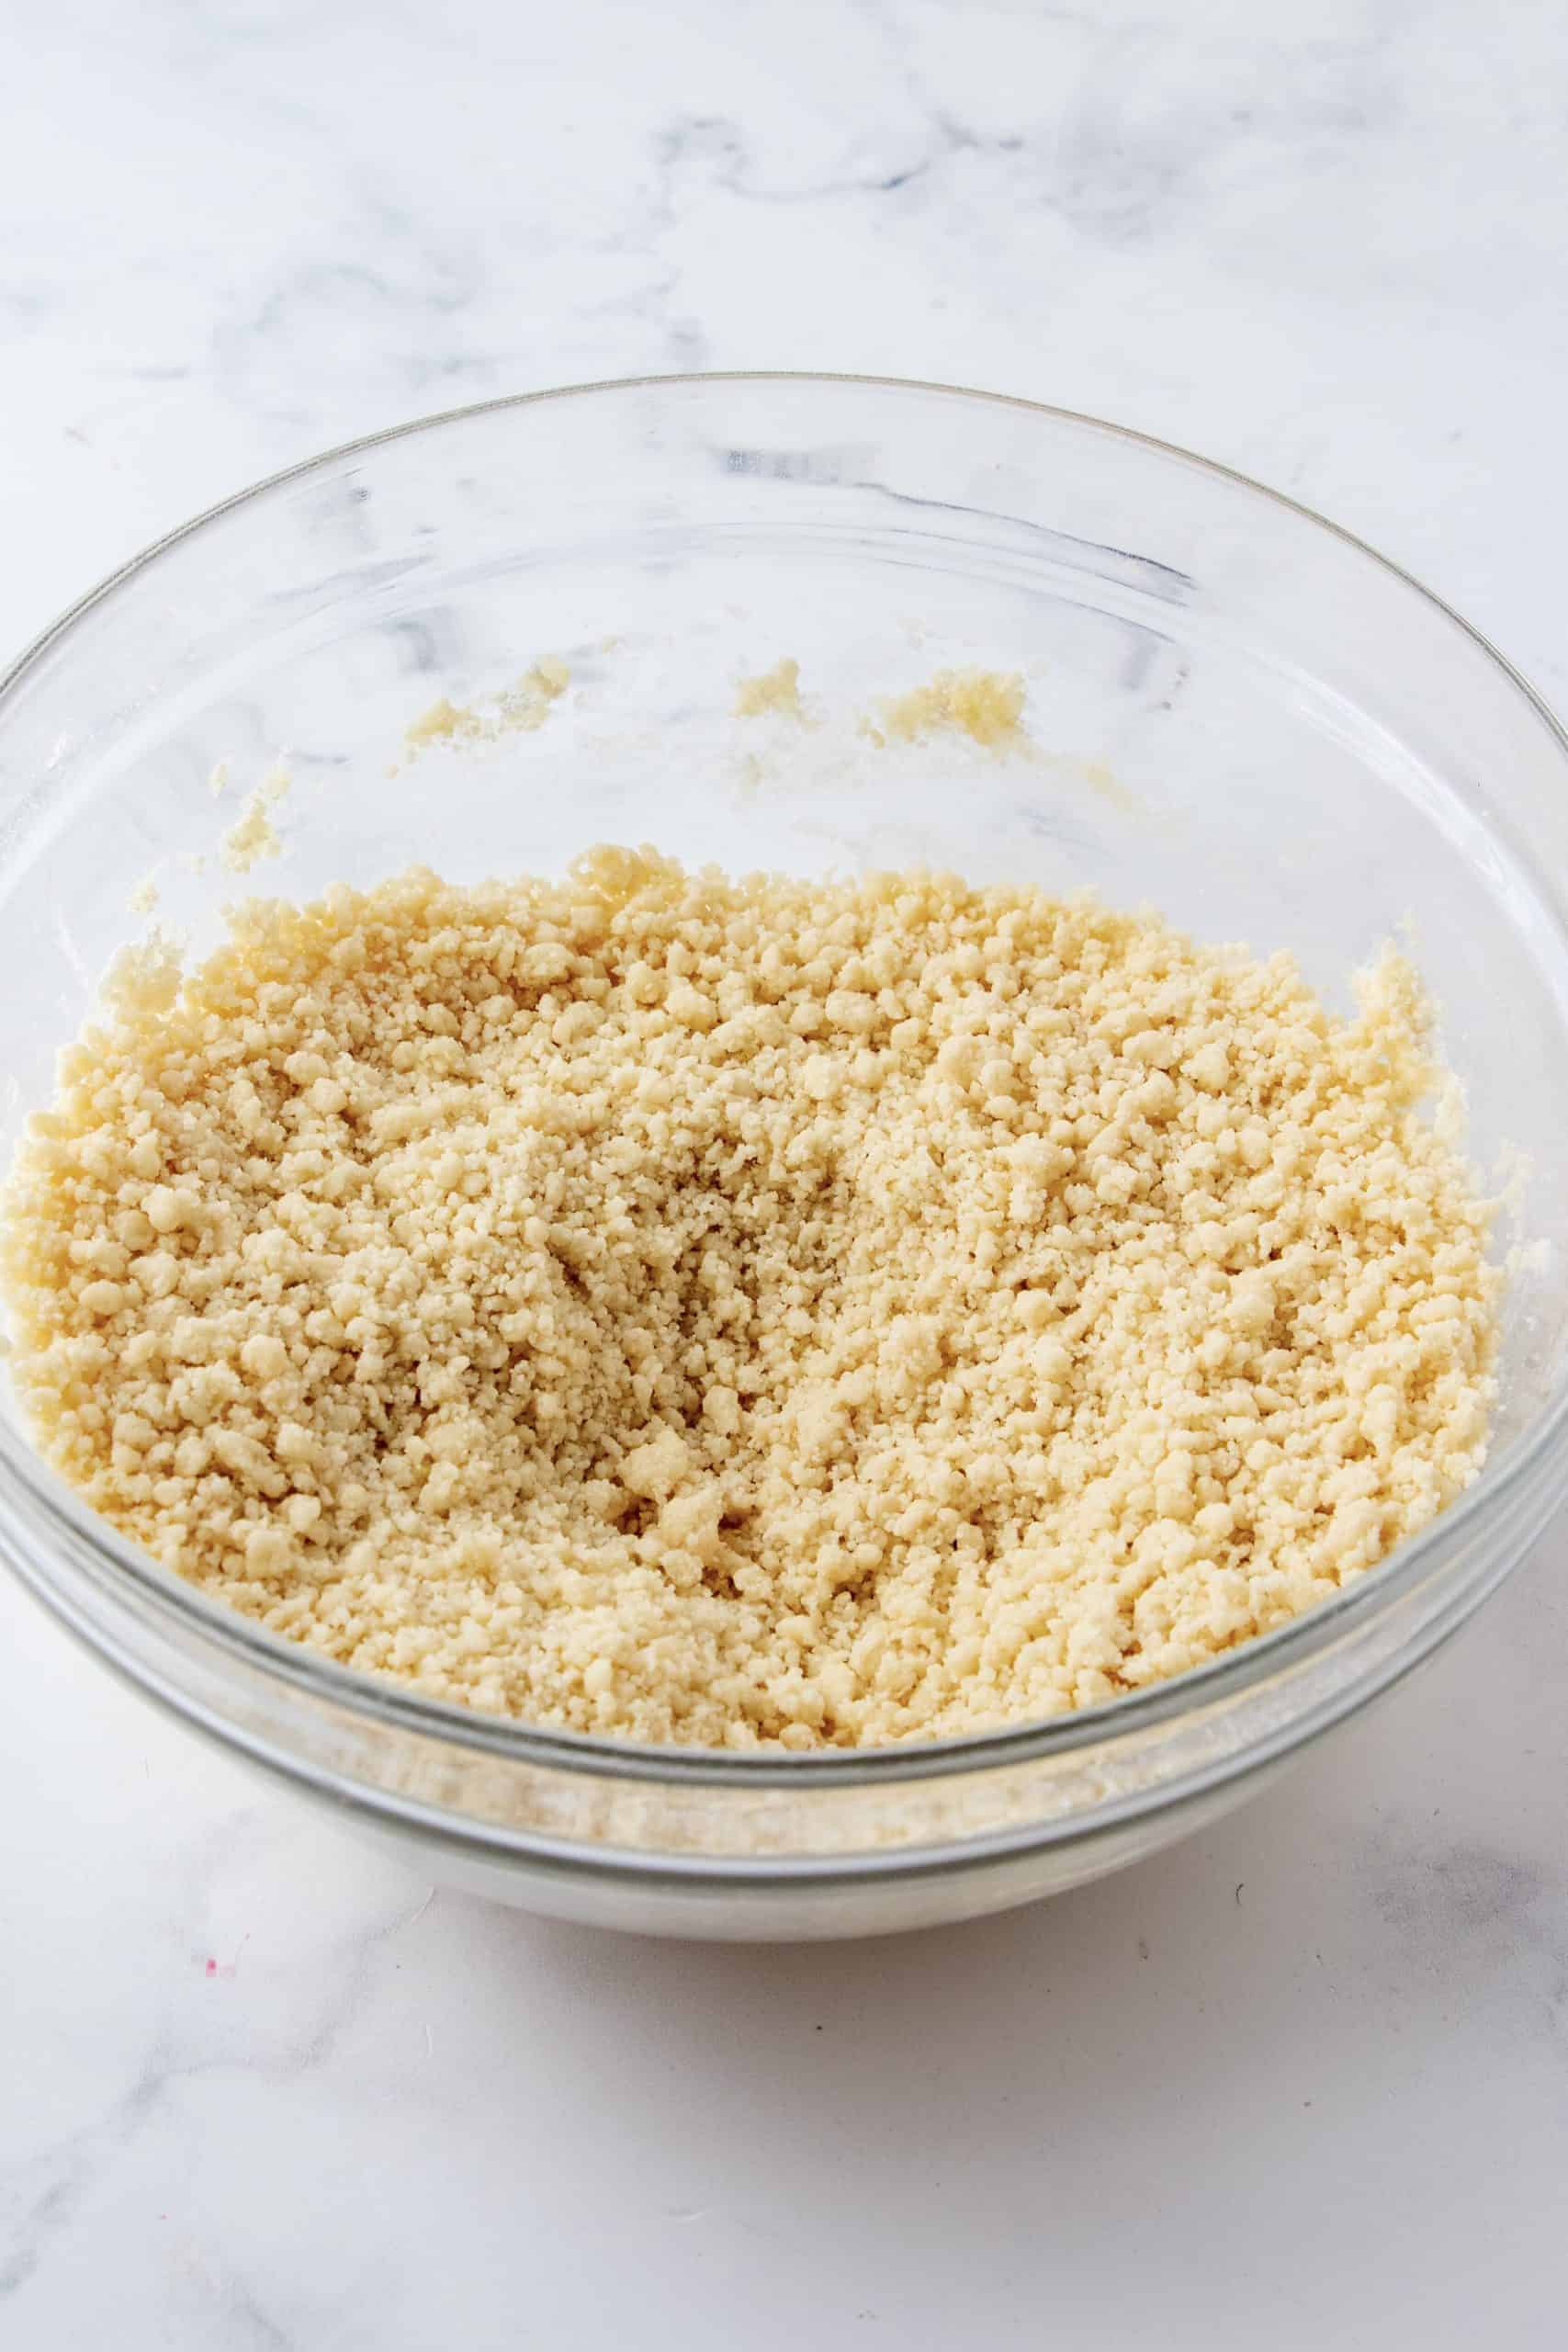 Crumb mixture after flour and butter mixture are combined.